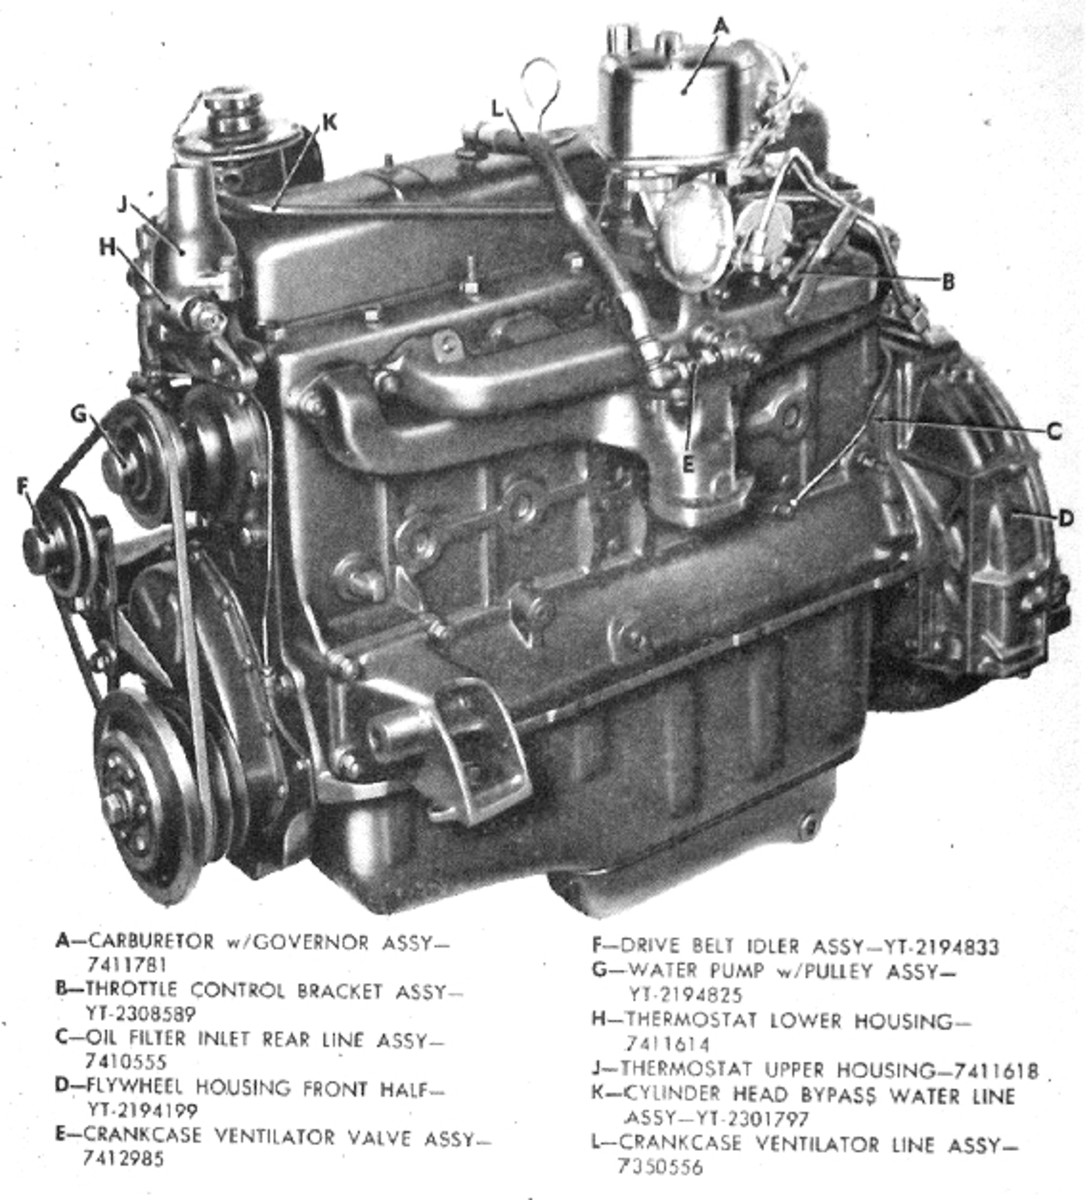 GMC 302 engine left front view